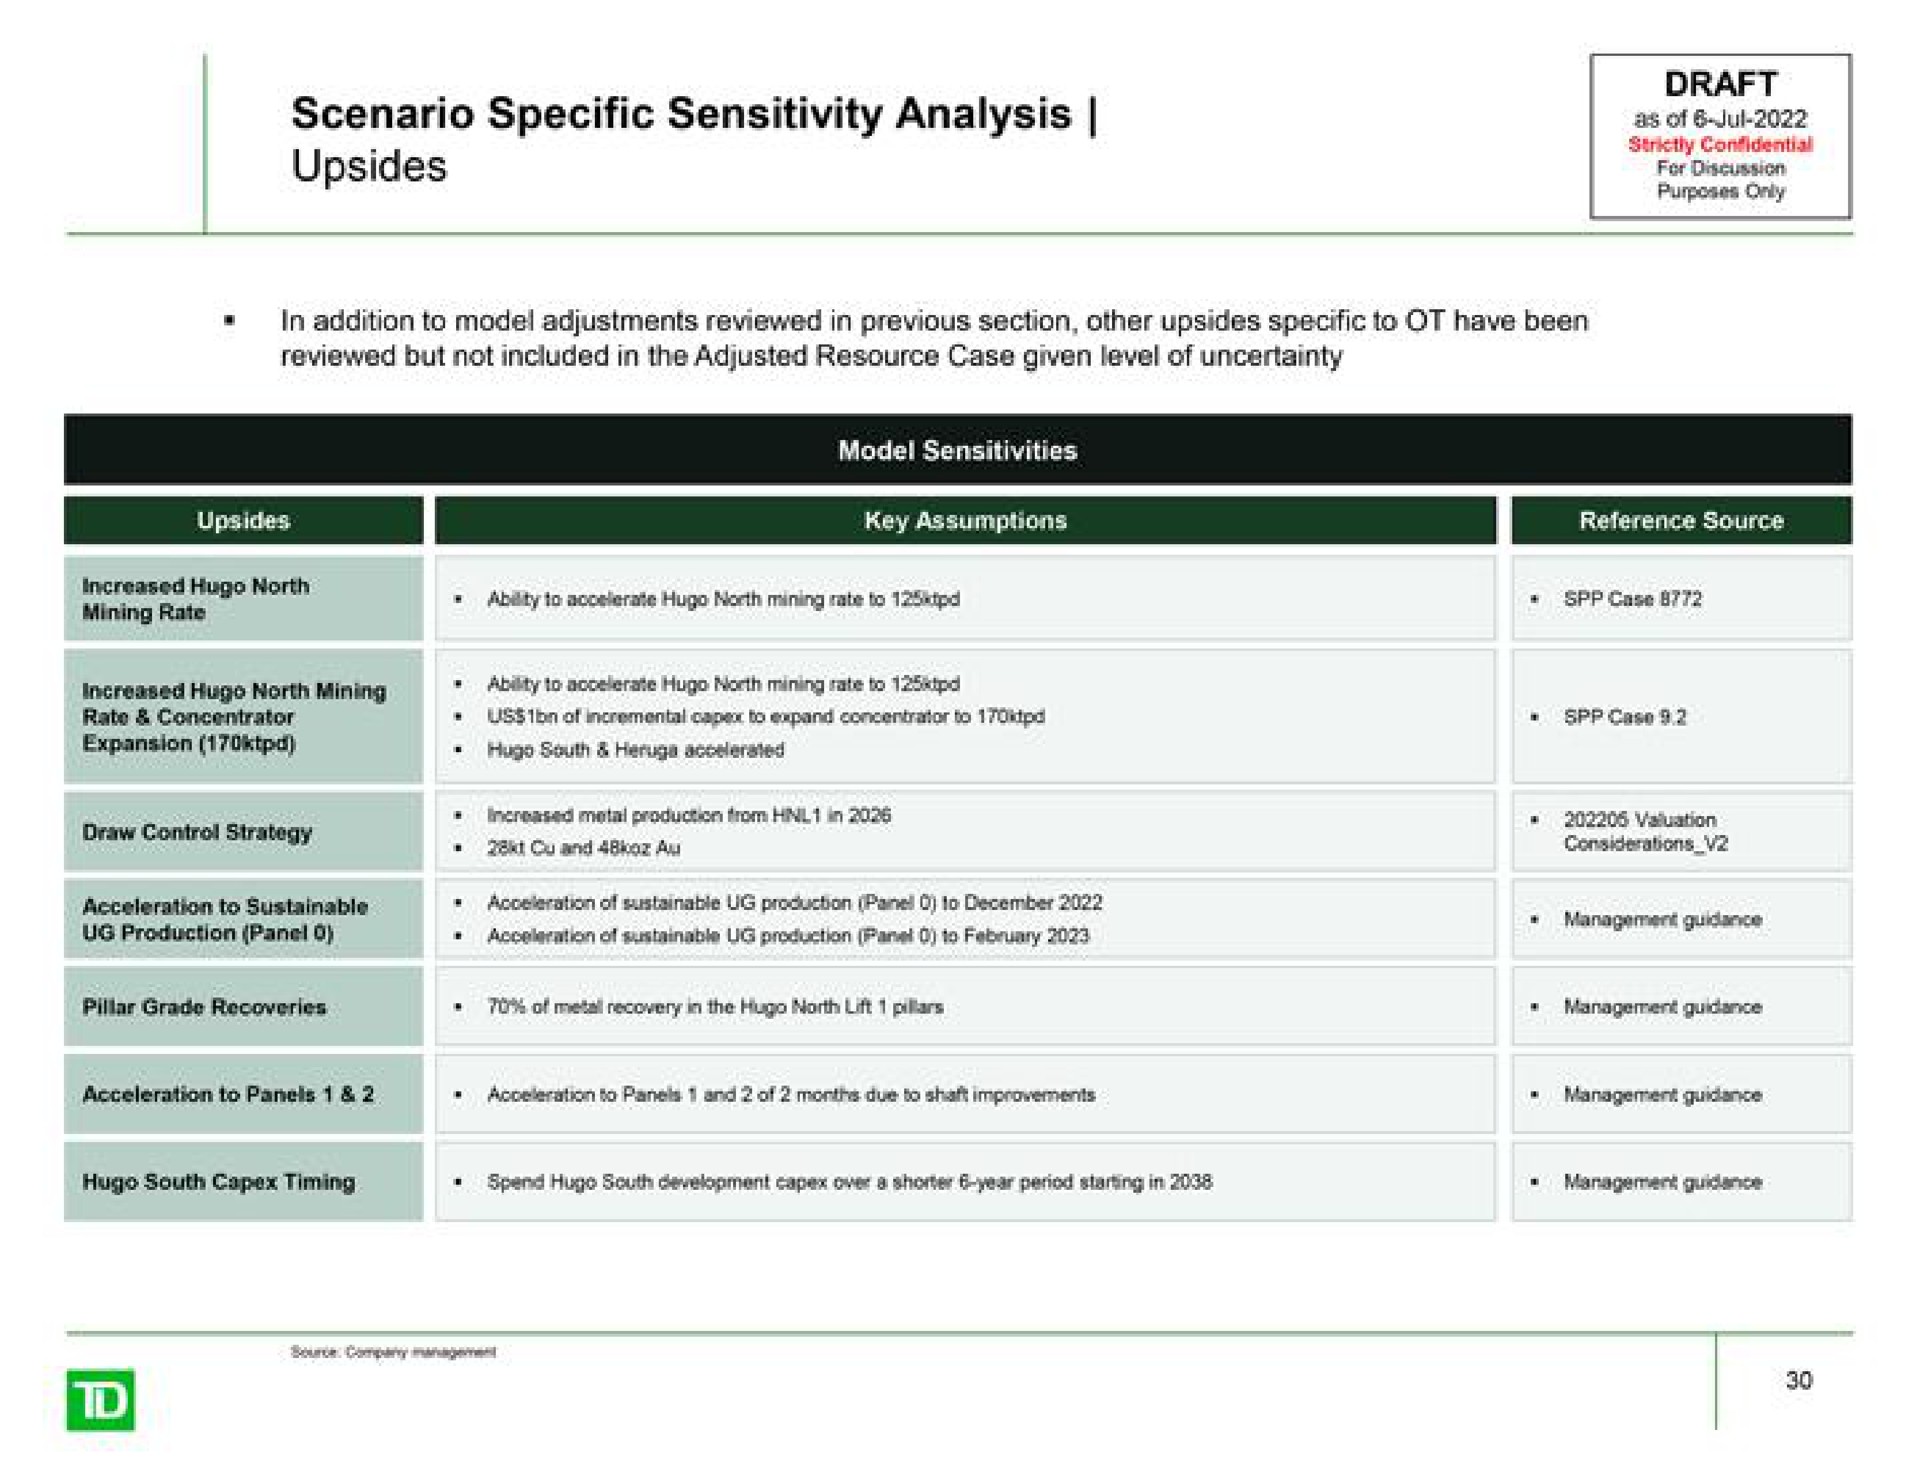 scenario specific sensitivity analysis upsides draft as of for | TD Securities